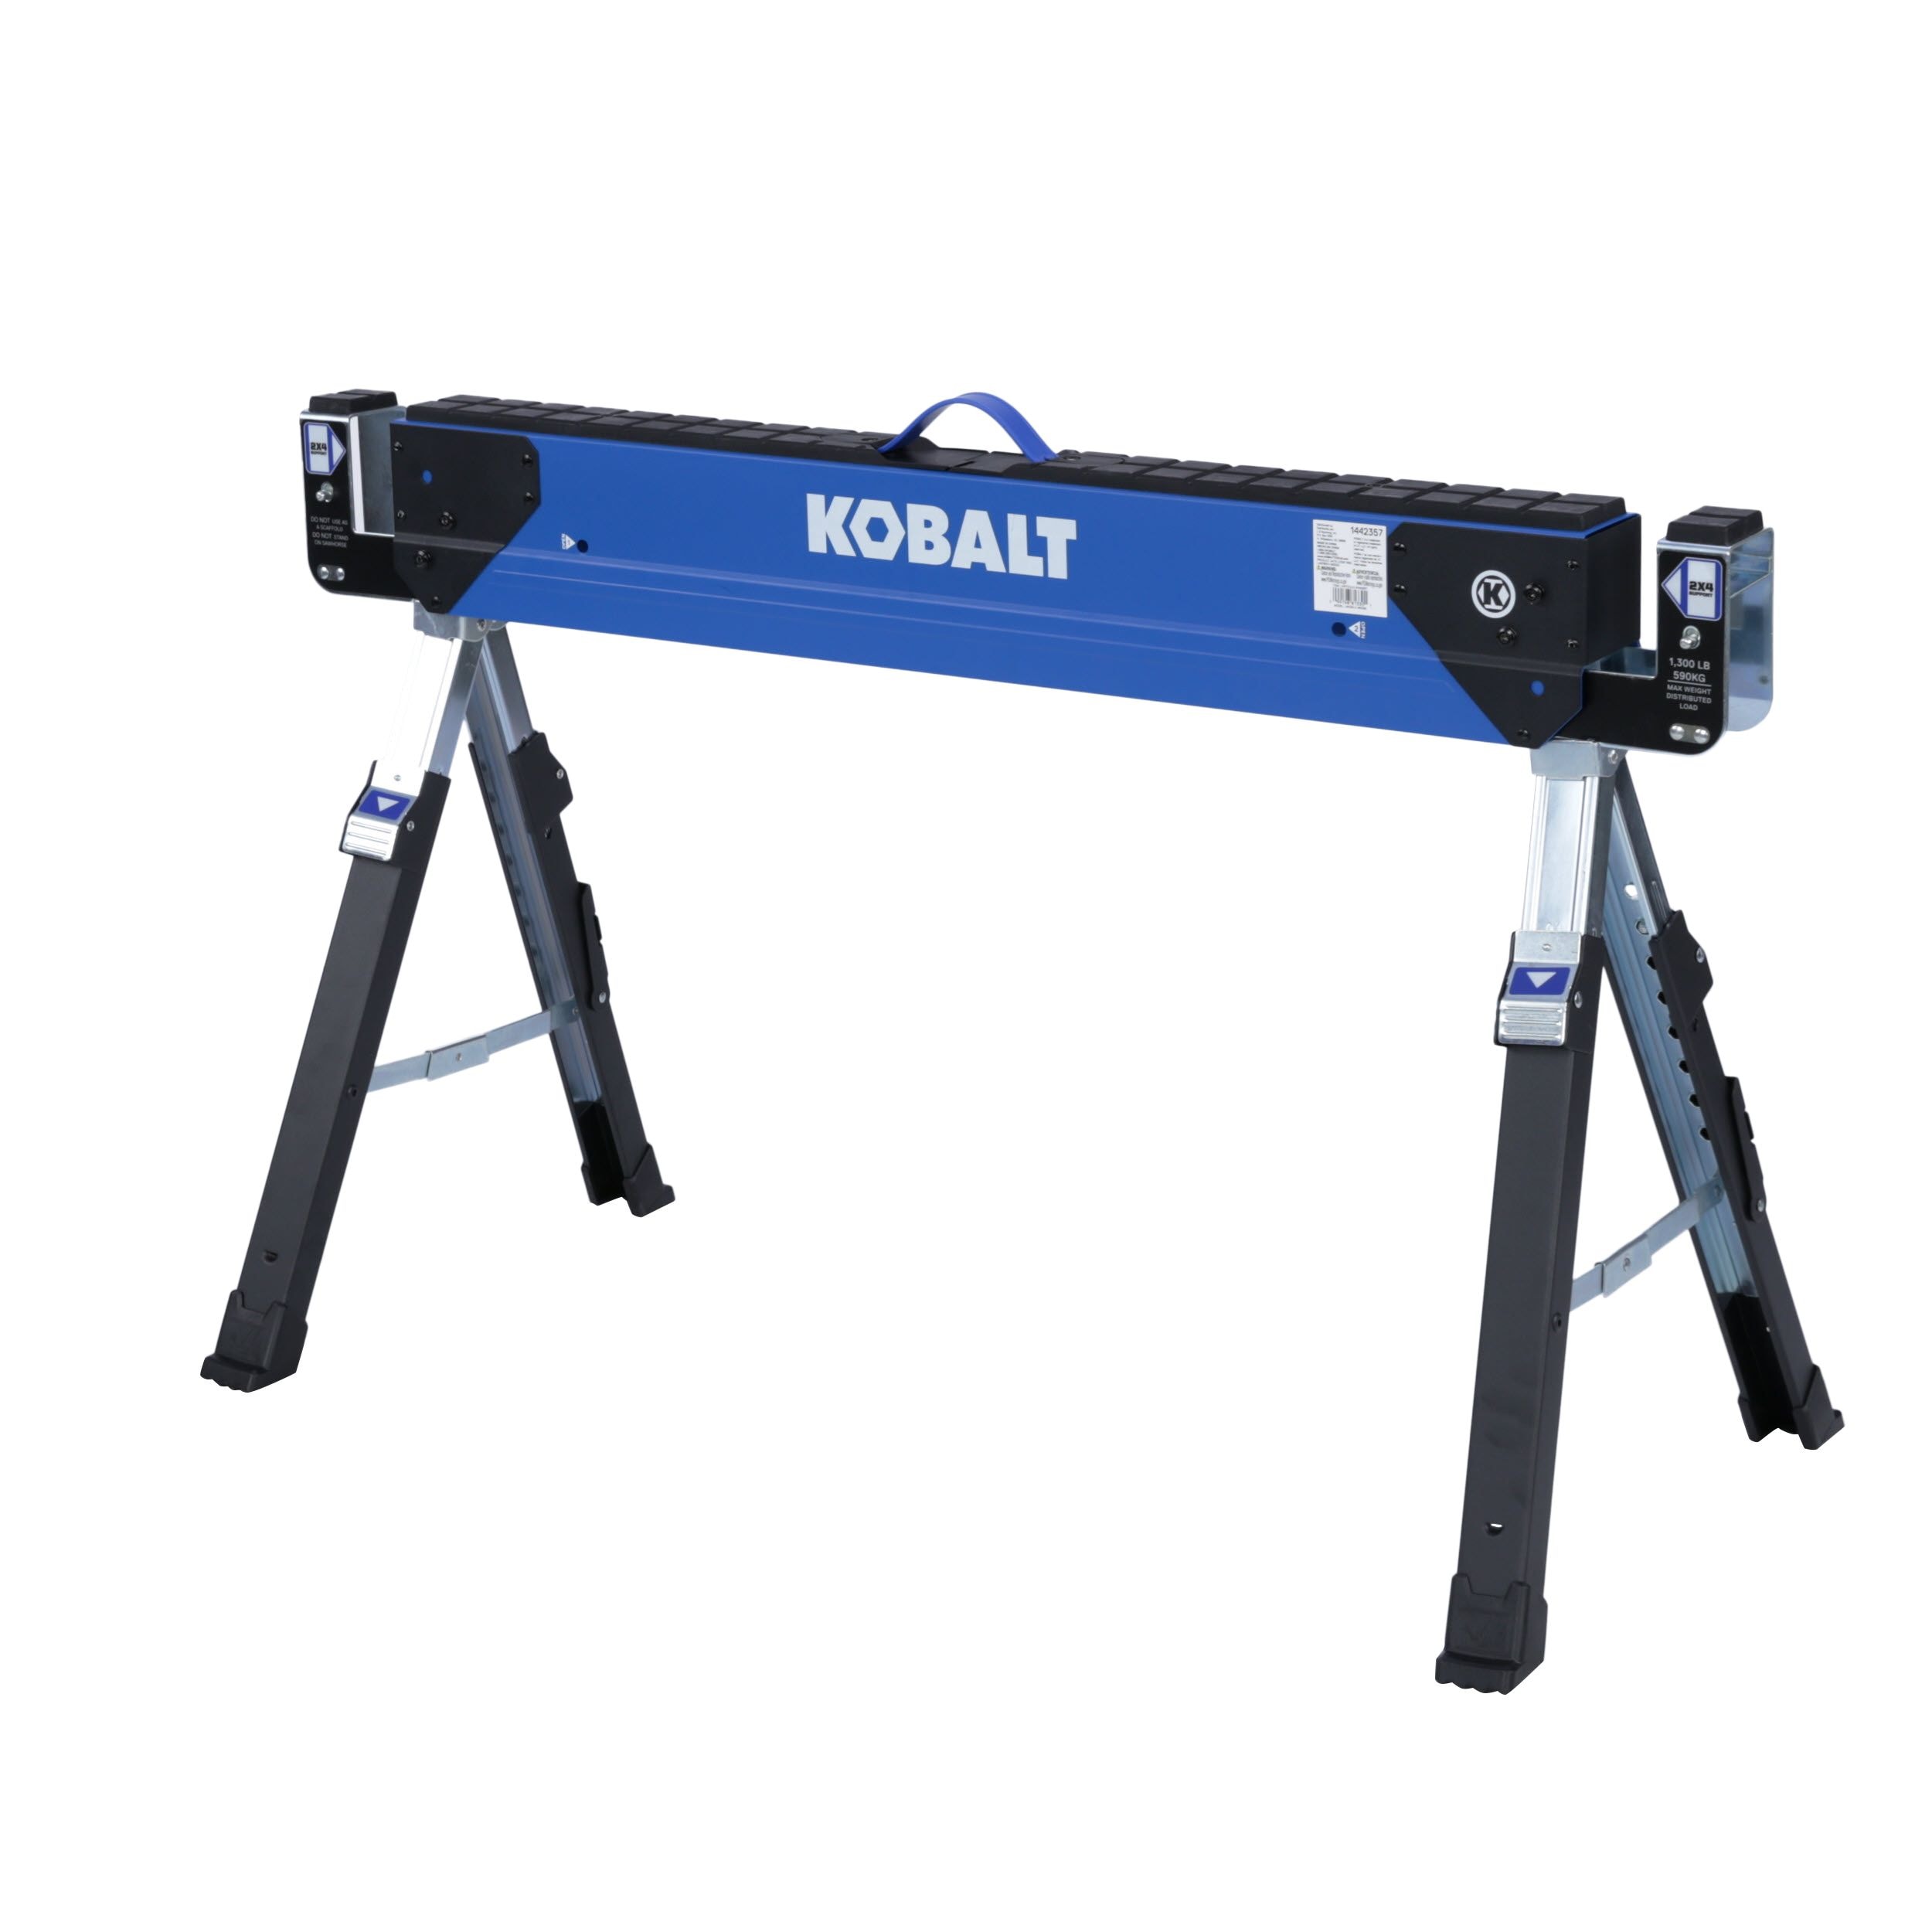 Kobalt 42-In W X 32-In H Adjustable Steel Saw Horse (1100-Lb Capacity) At  Lowes.Com